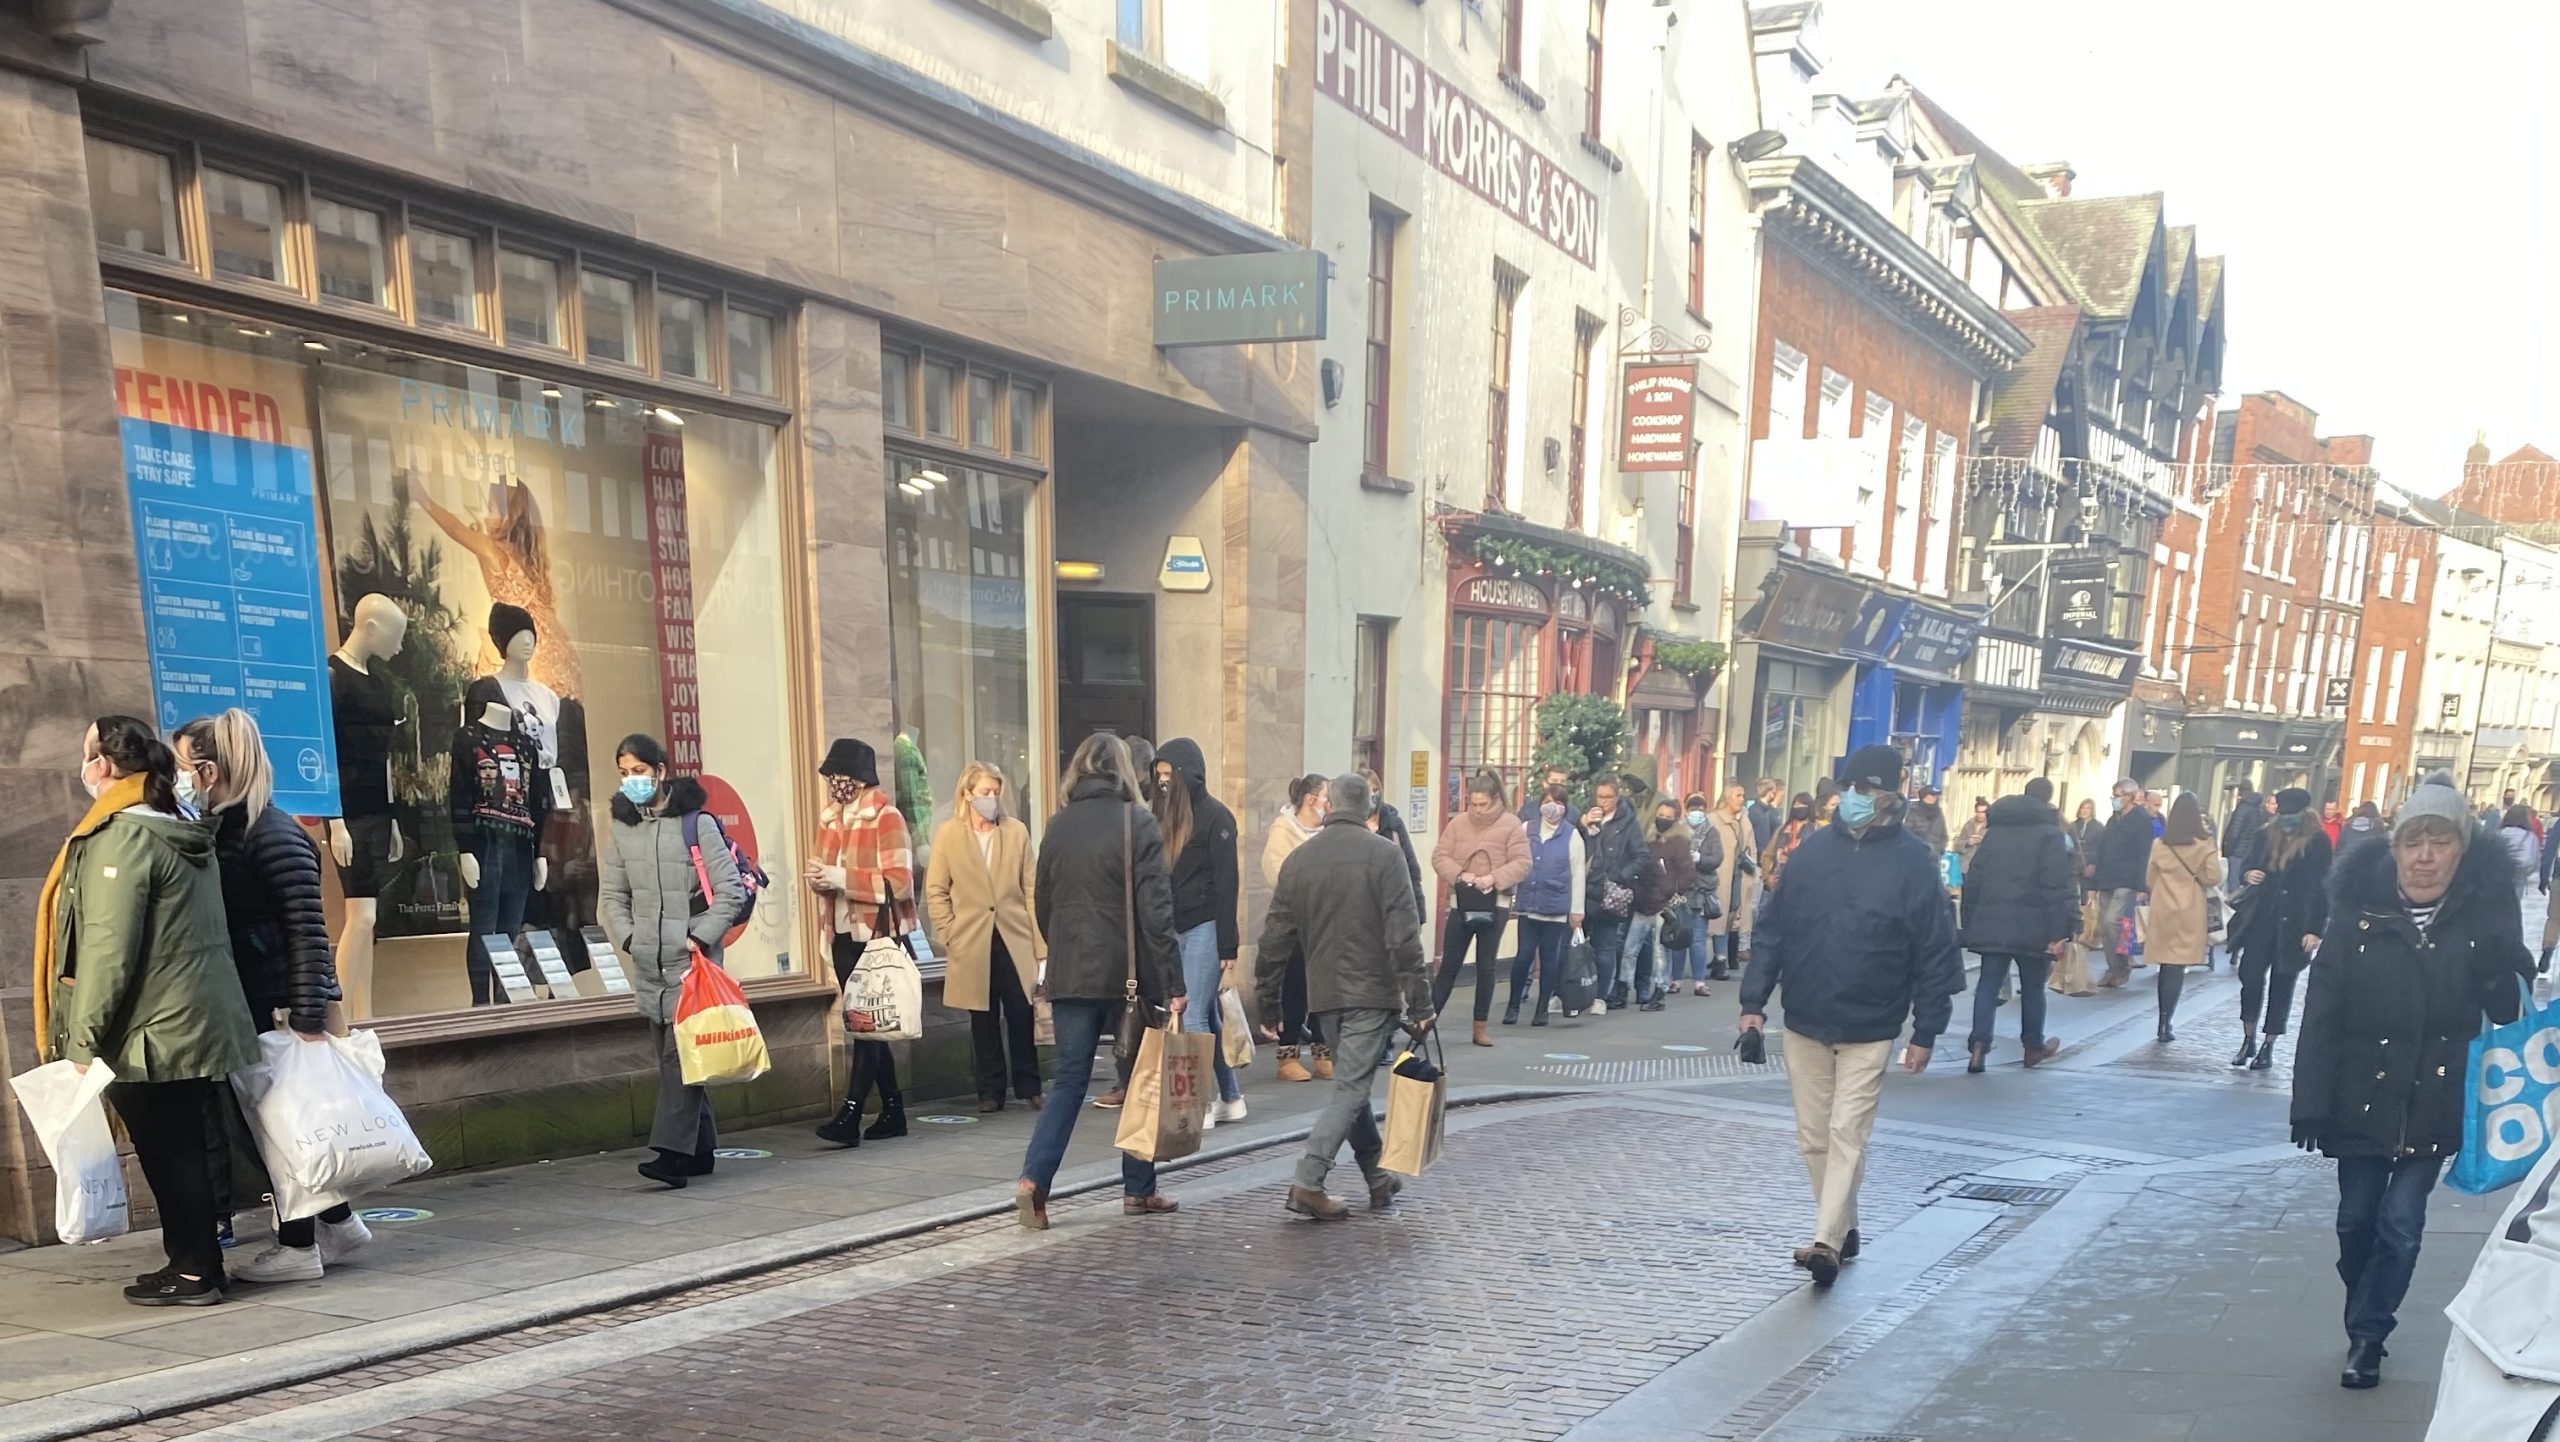 NEWS | Huge queues outside shops in Hereford as Christmas Shopping rush begins